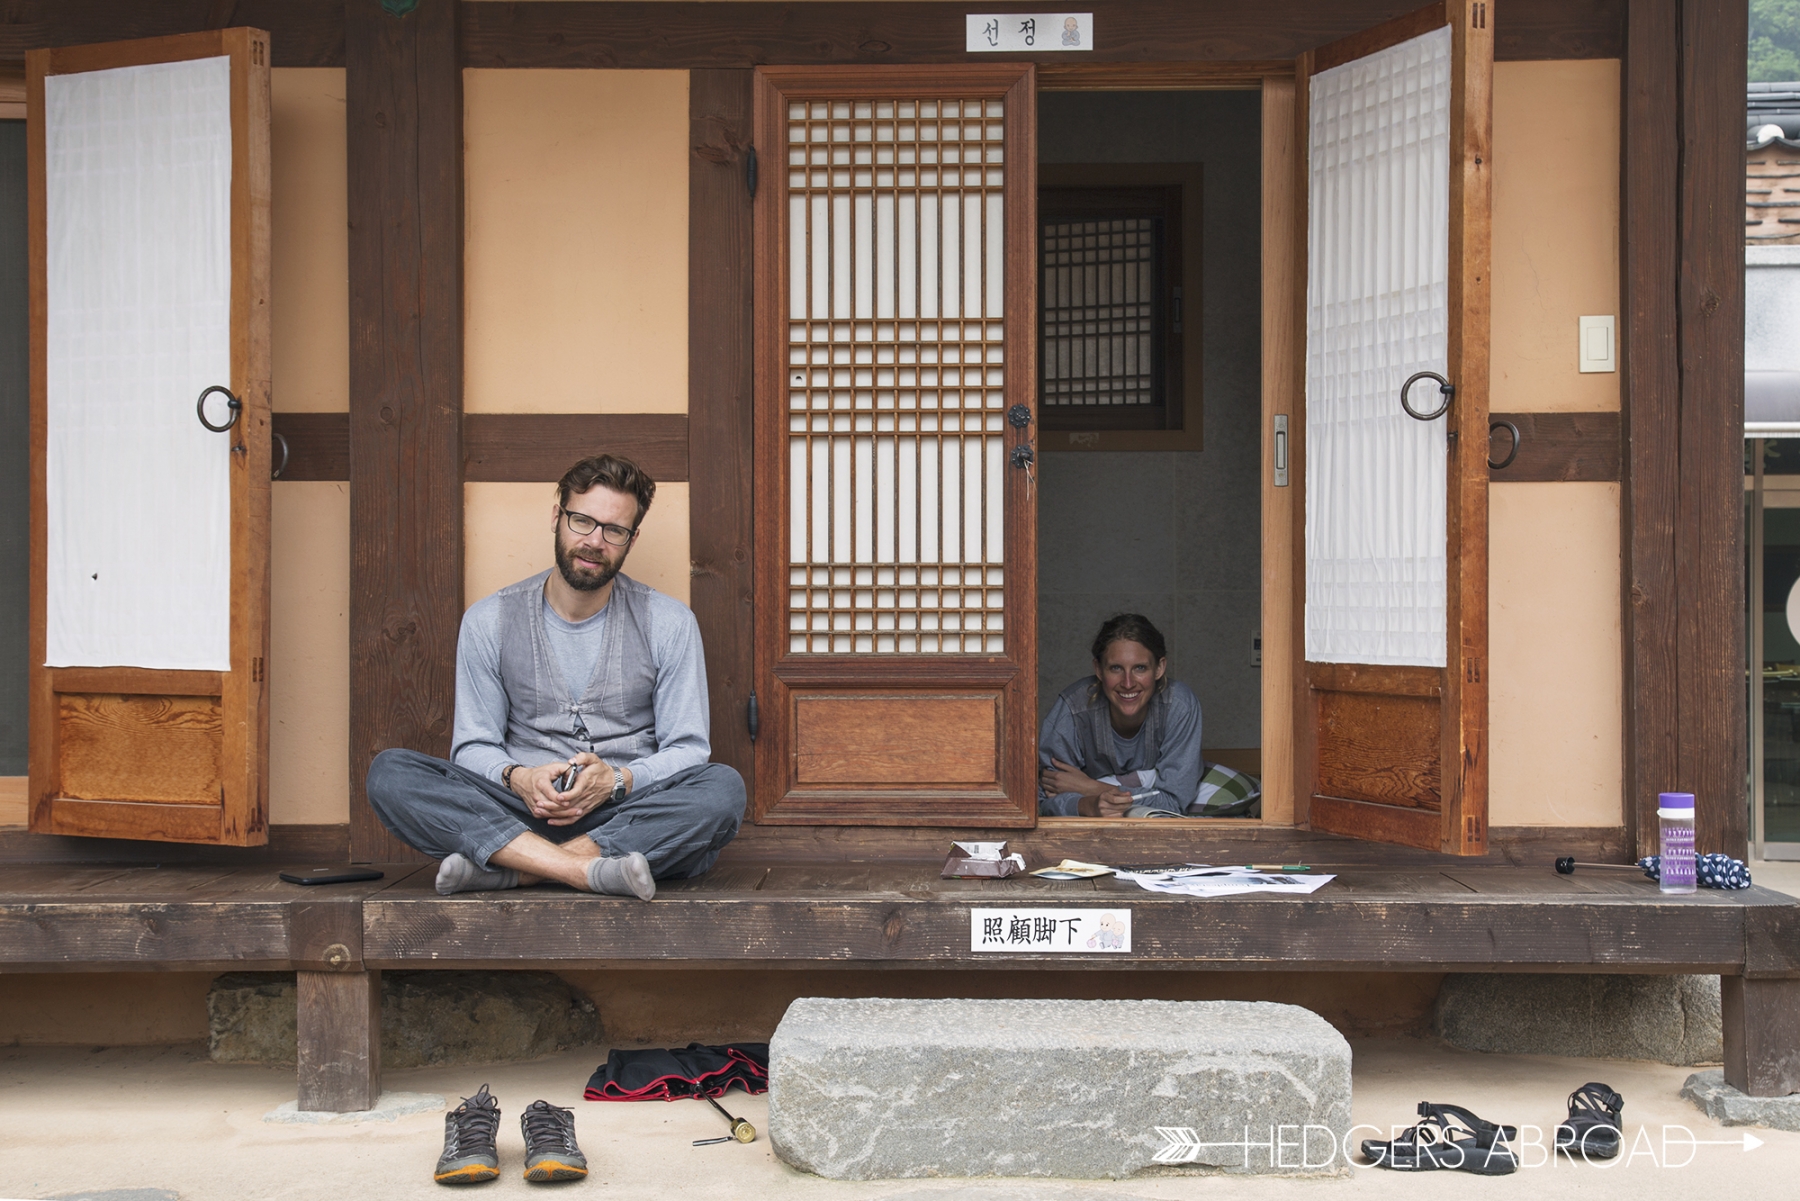 Buddhist for a Weekend // Templestay Programs in Korea